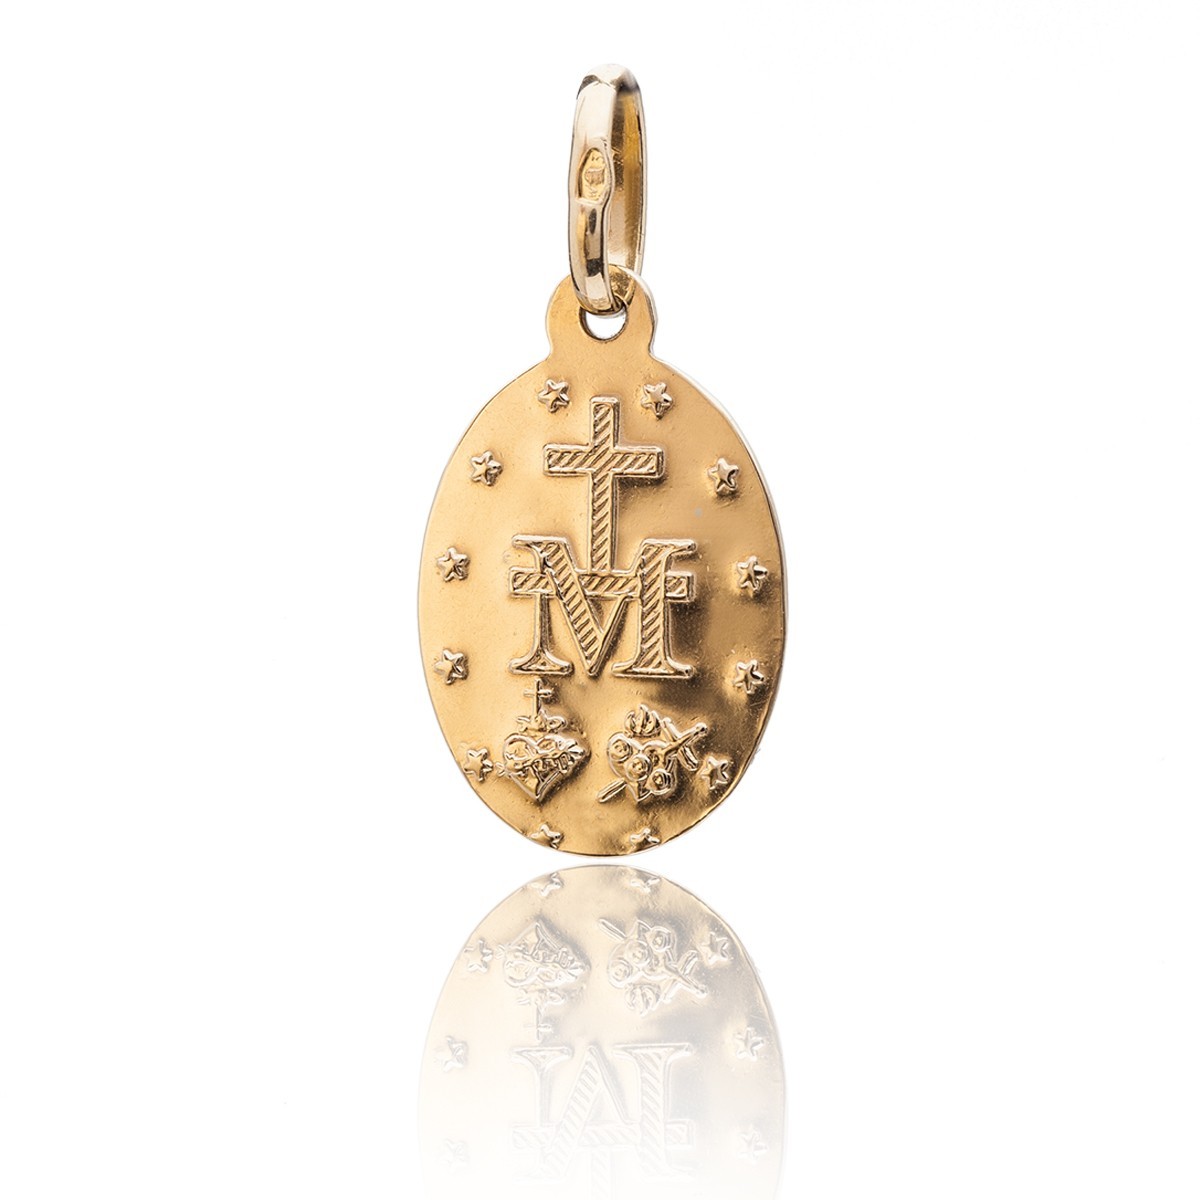 OUR LADY MIRACULOUS MEDAL BIG GOLD 14K